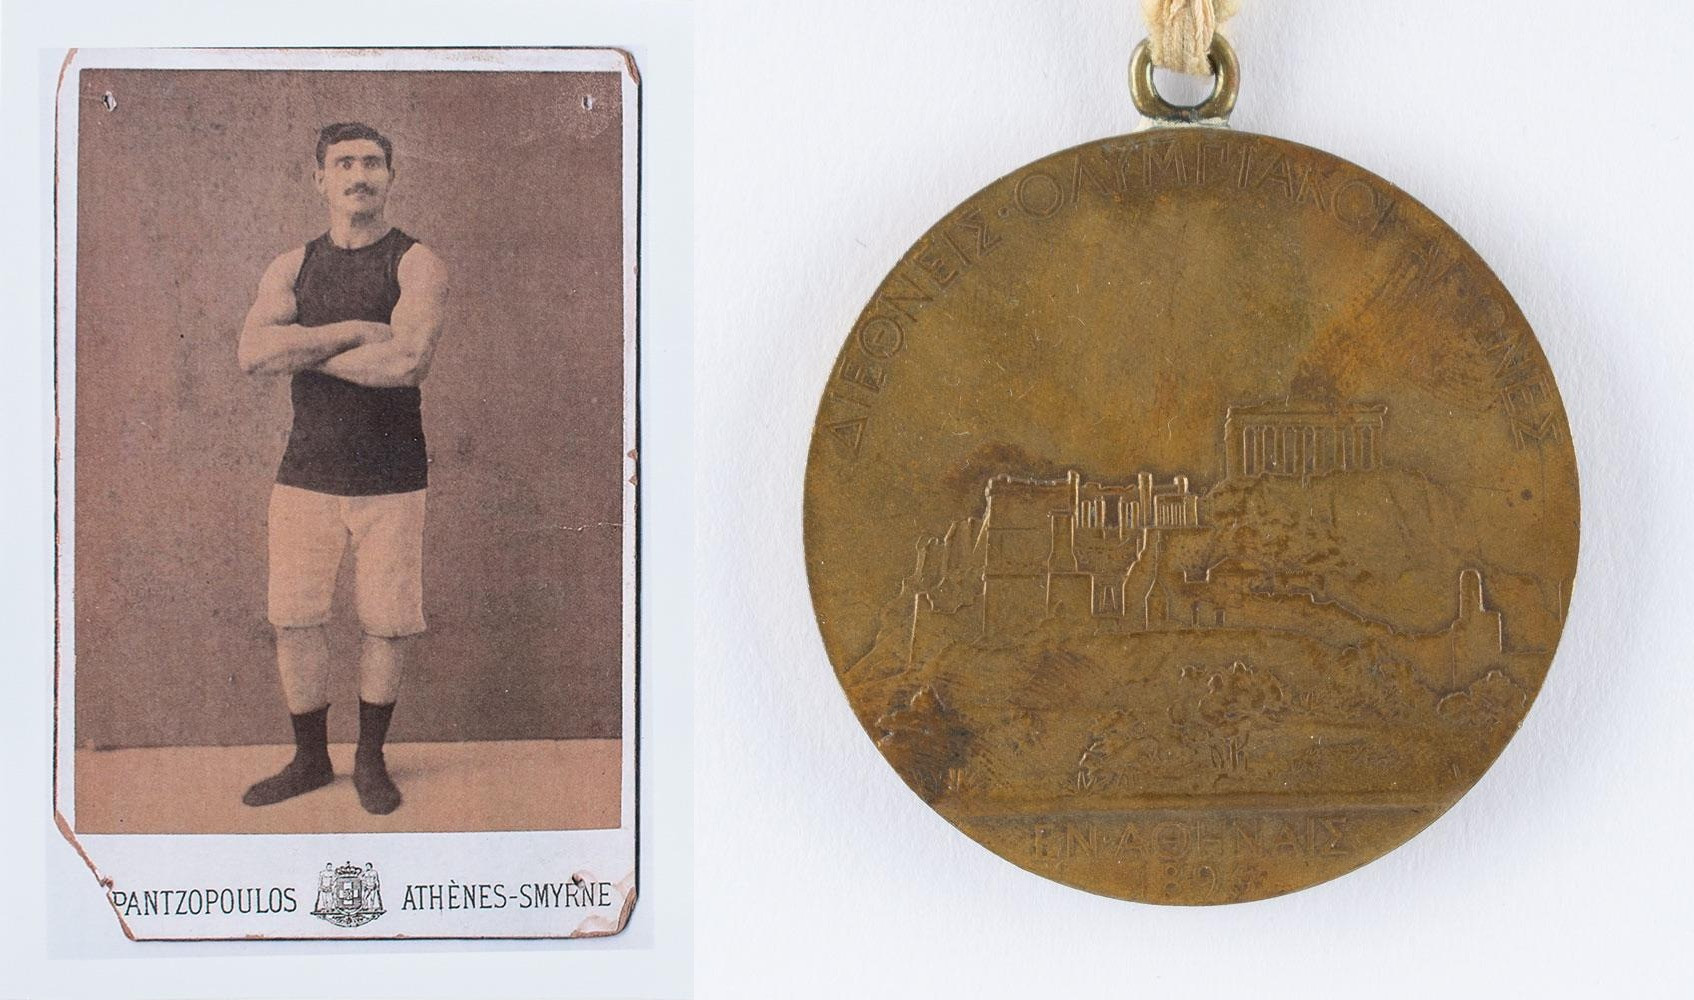 Greece’s Georgios Tsitas won the Olympic medal for finishing second in the Greco-Roman wrestling event in a competition that took days to complete ©RR Auction 